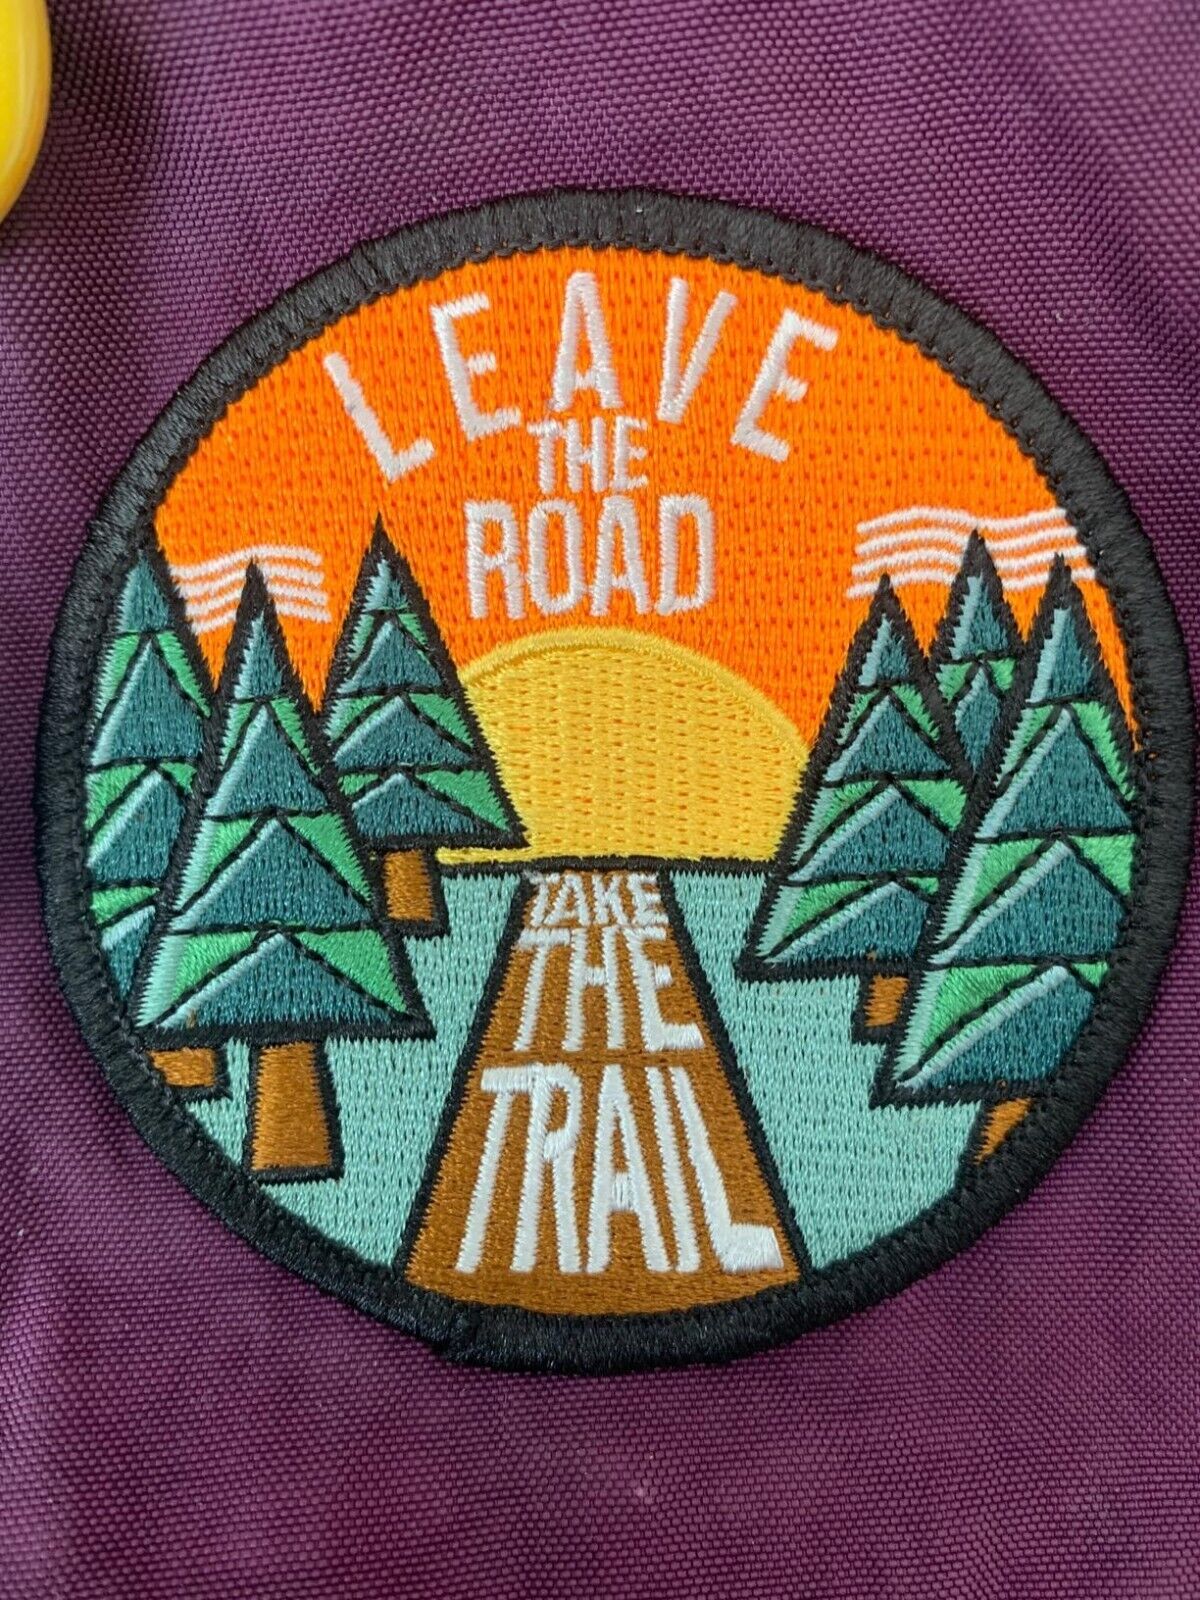 Leave the Road Take Trail Patch (3 Inch) Iron or Sew-on Badge Hiking Backpack Camino Trek Trails Adventure Patches